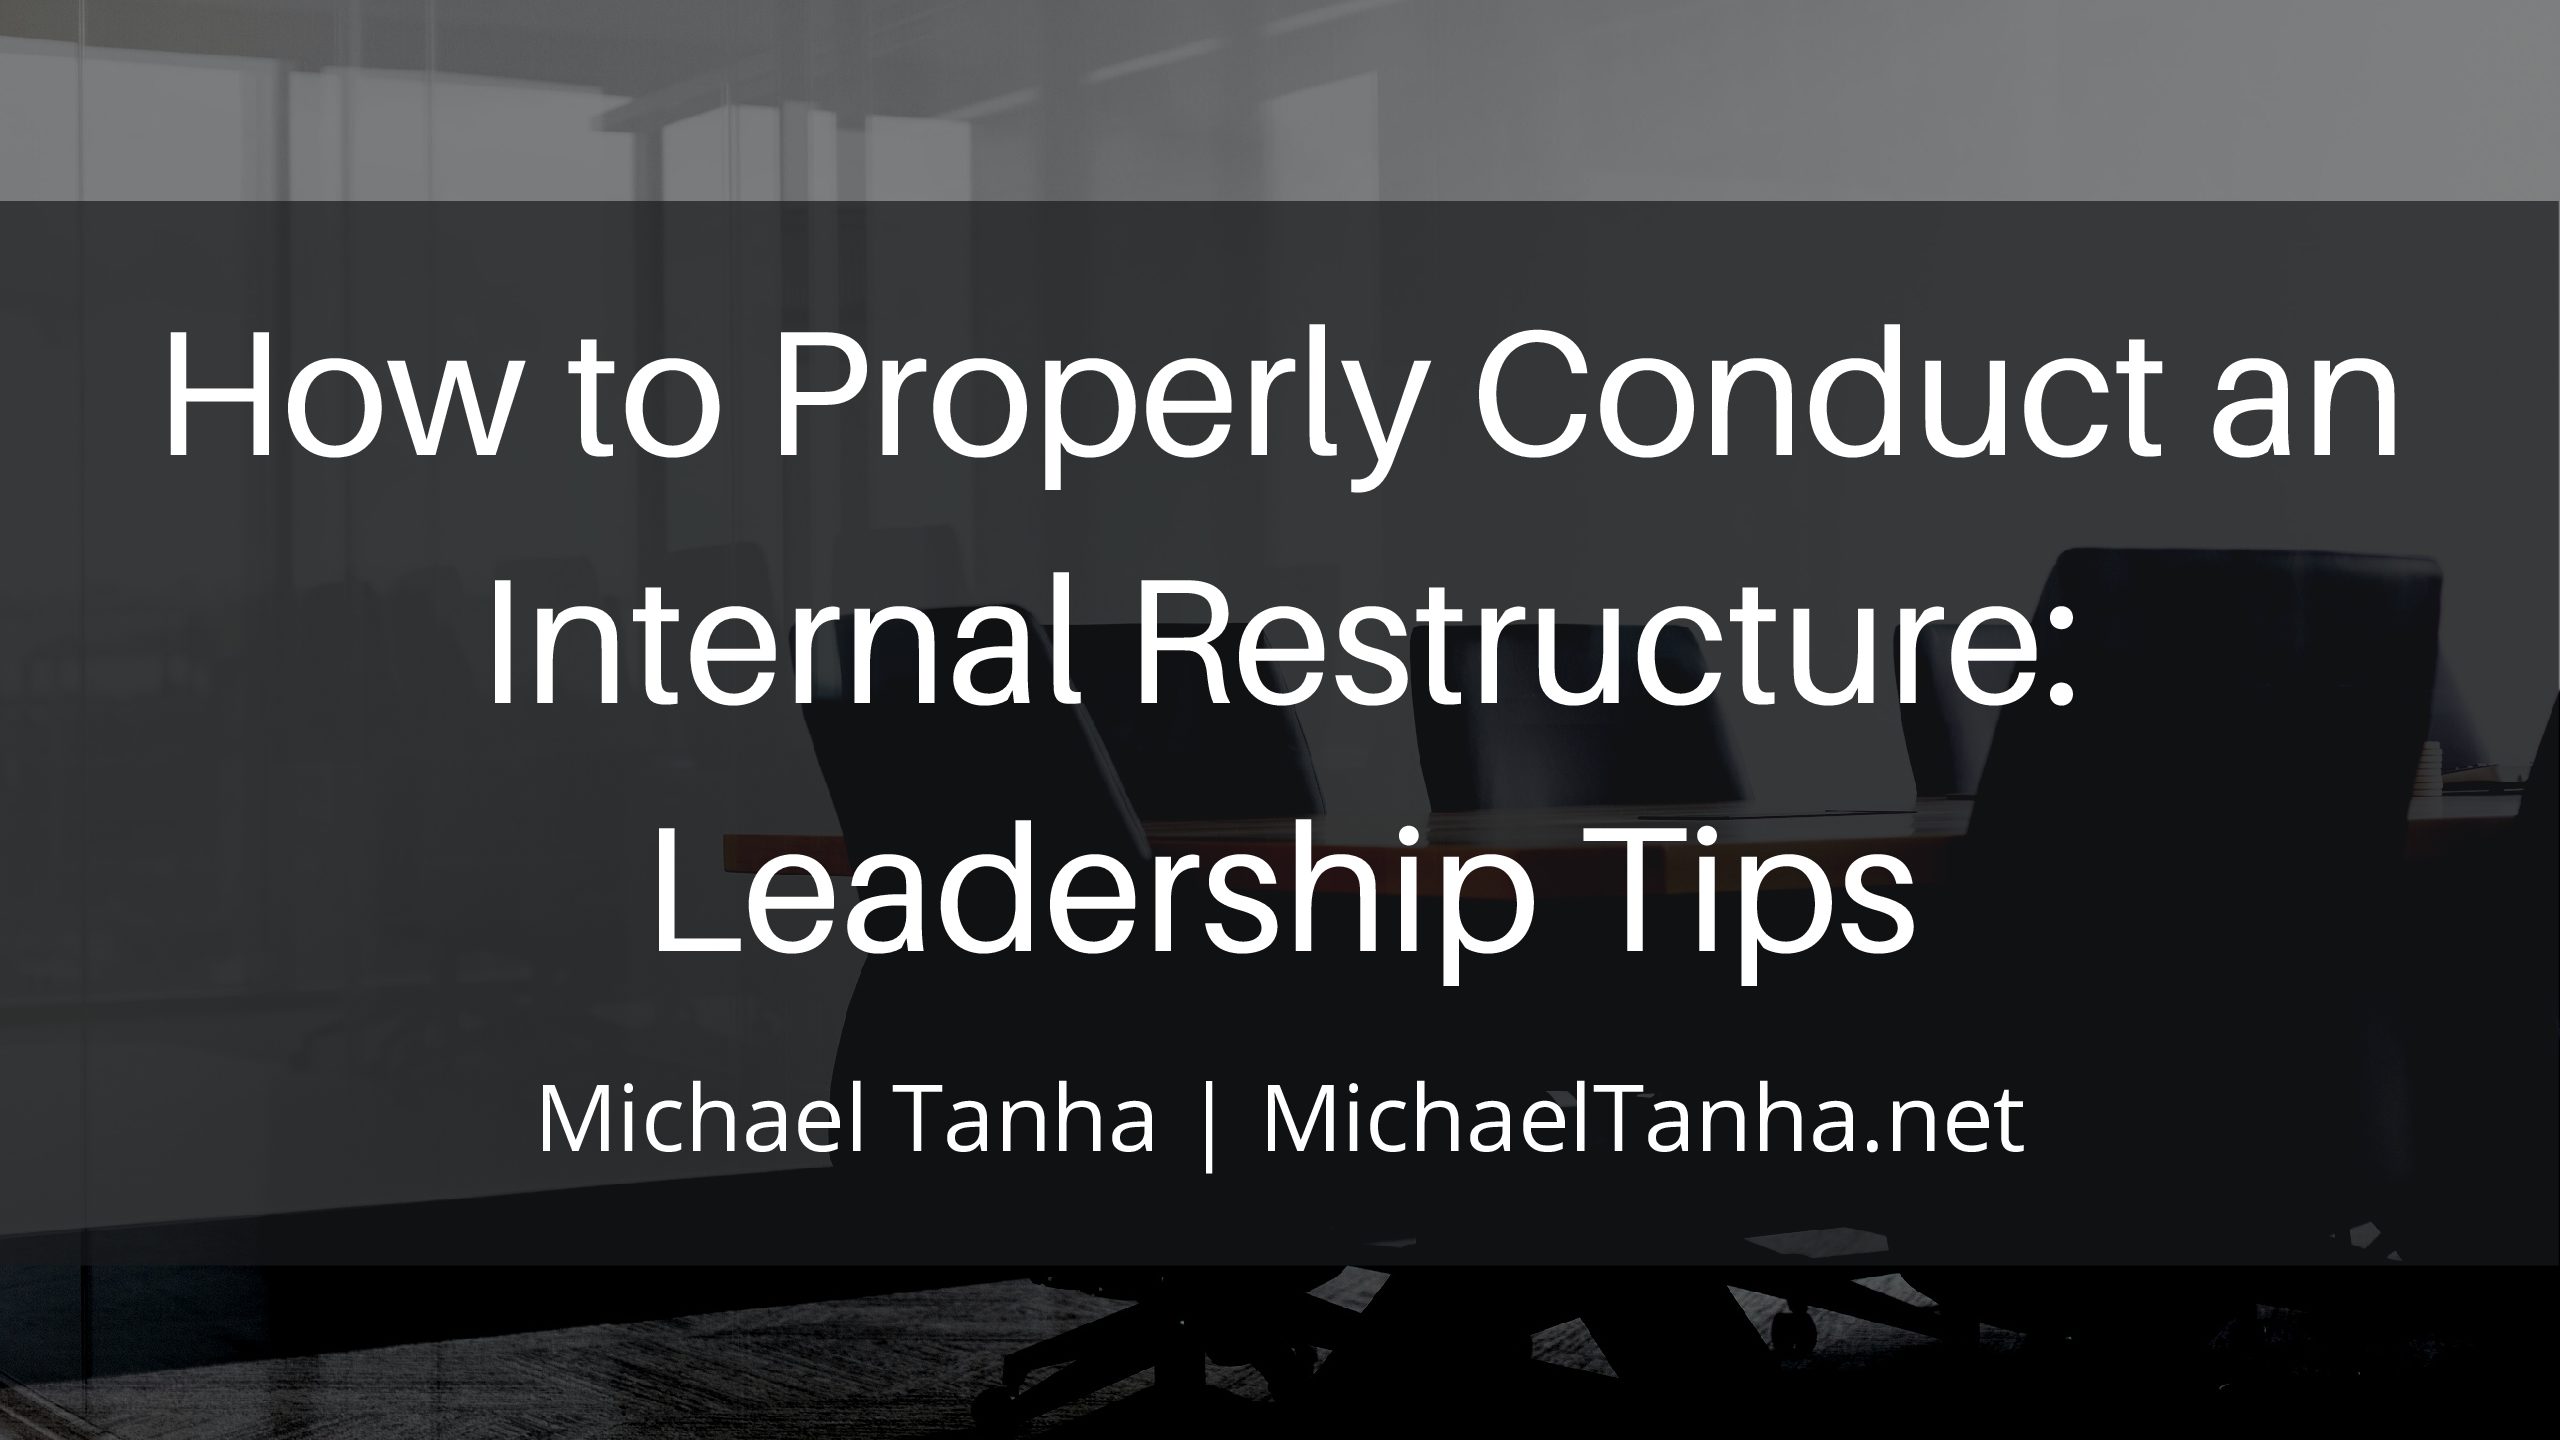 How to Properly Conduct an Internal Restructure: Leadership Tips